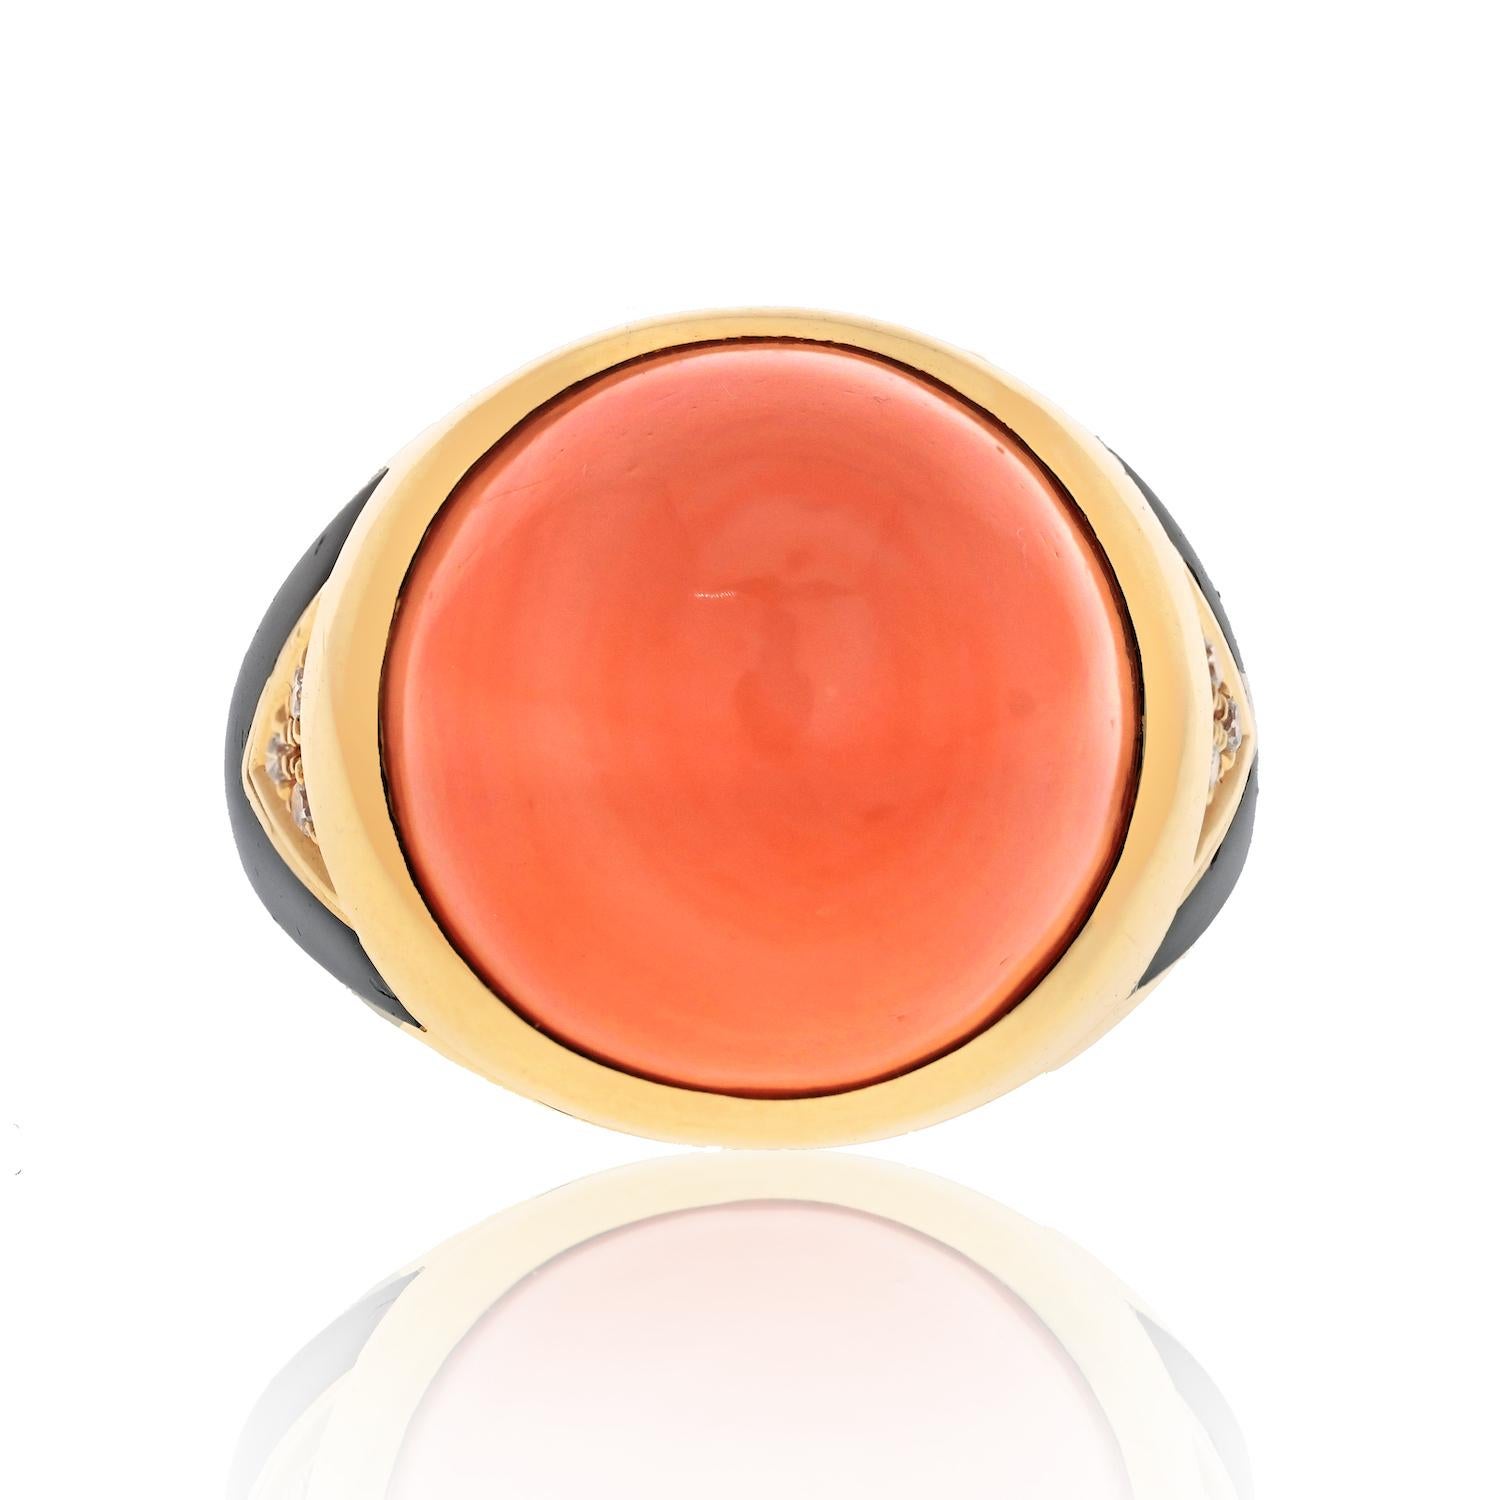 Elevate your style with our estate Bvlgari 18K Yellow Gold Coral Pyramid Ring, a true masterpiece of design and craftsmanship. This exquisite ring is a testament to Bvlgari's legacy of blending elegance with innovation.

Crafted from radiant 18K